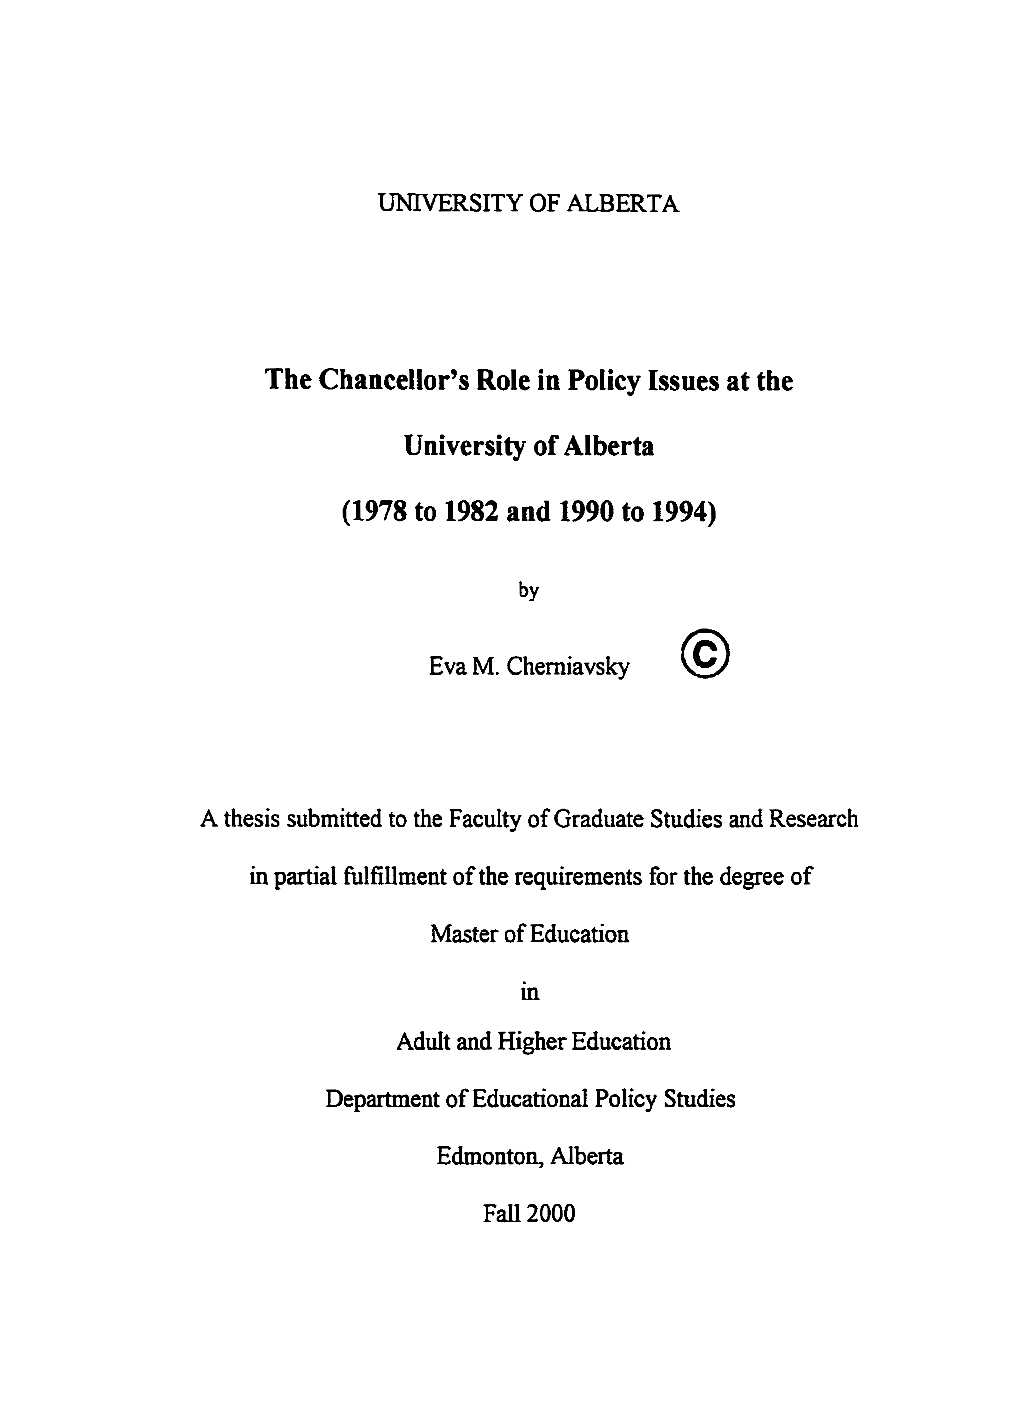 The Chancellor9s Role in Policy Issues at the University of Alberta